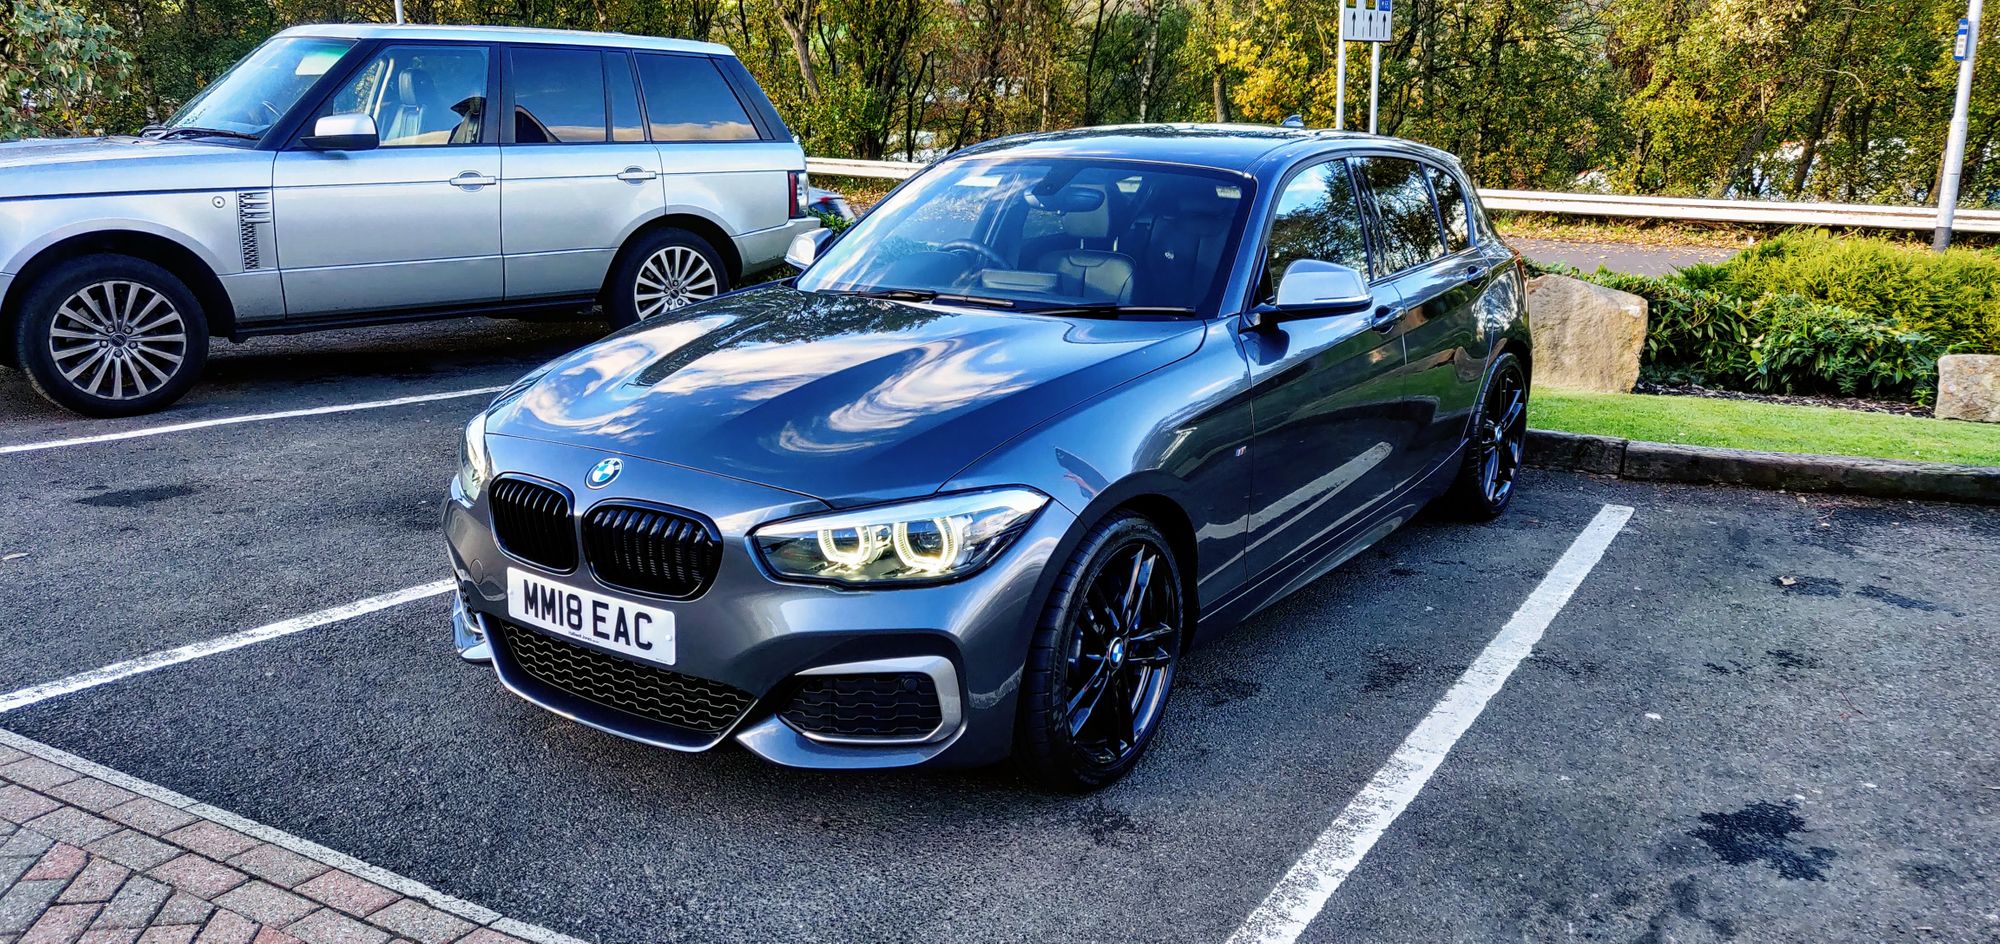 BMW 1 Series F20 - Check For These Issues Before Buying 